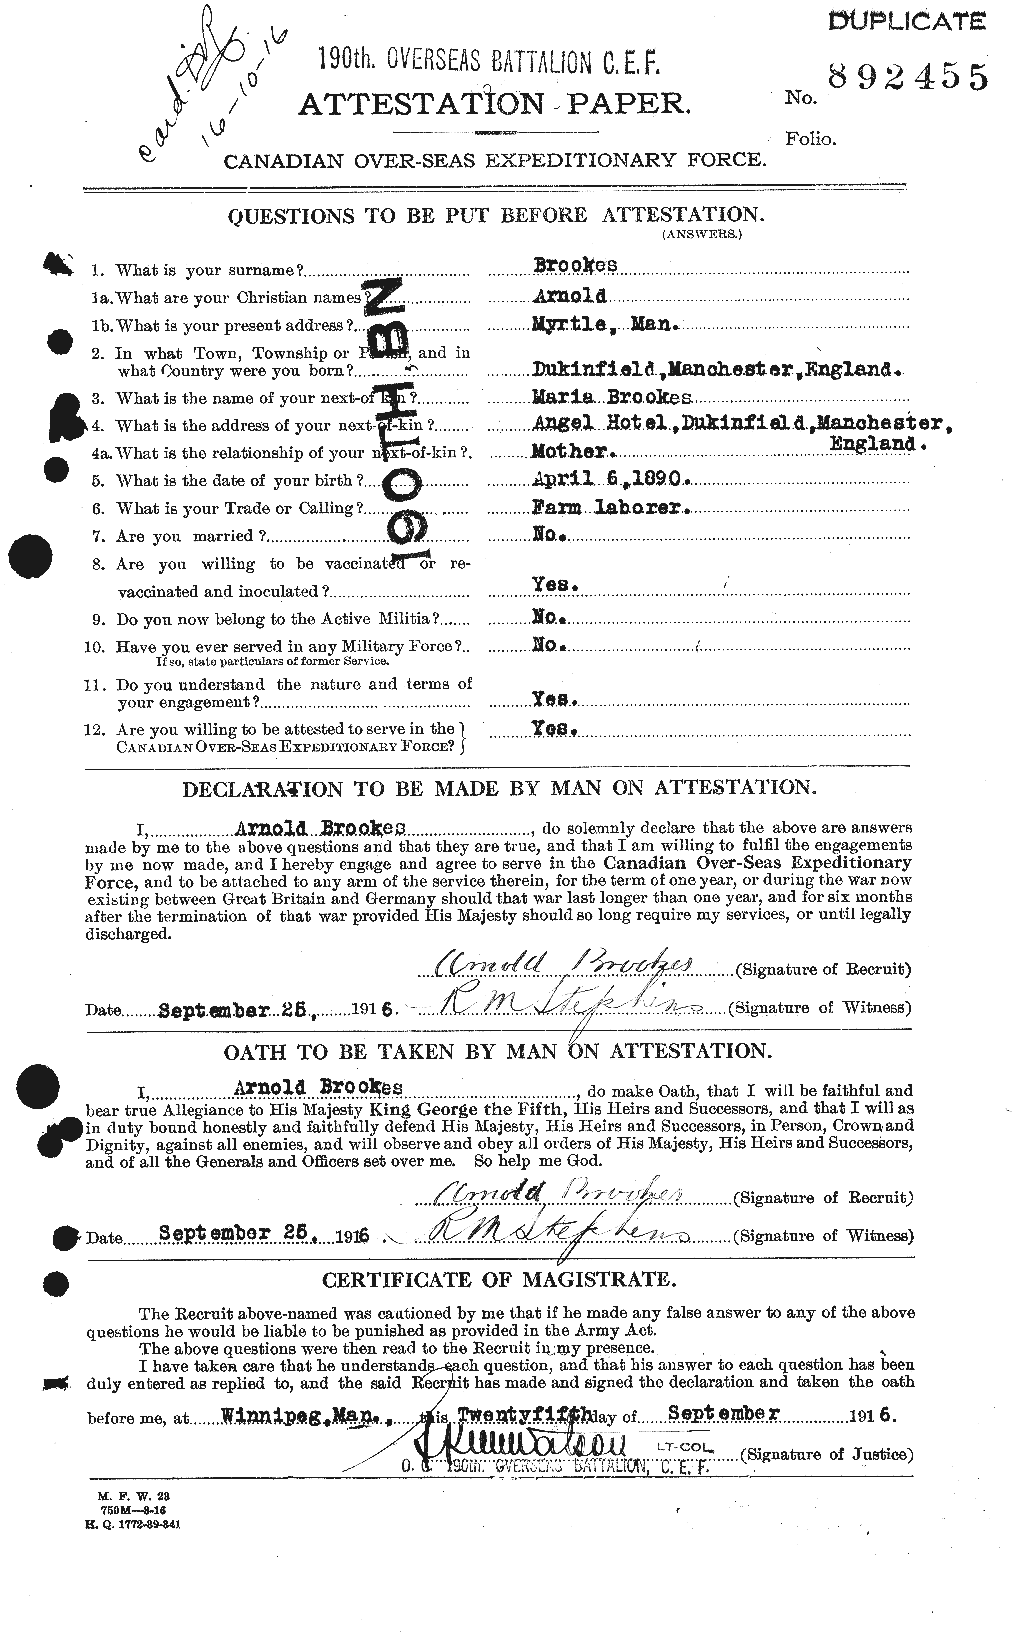 Personnel Records of the First World War - CEF 263066a